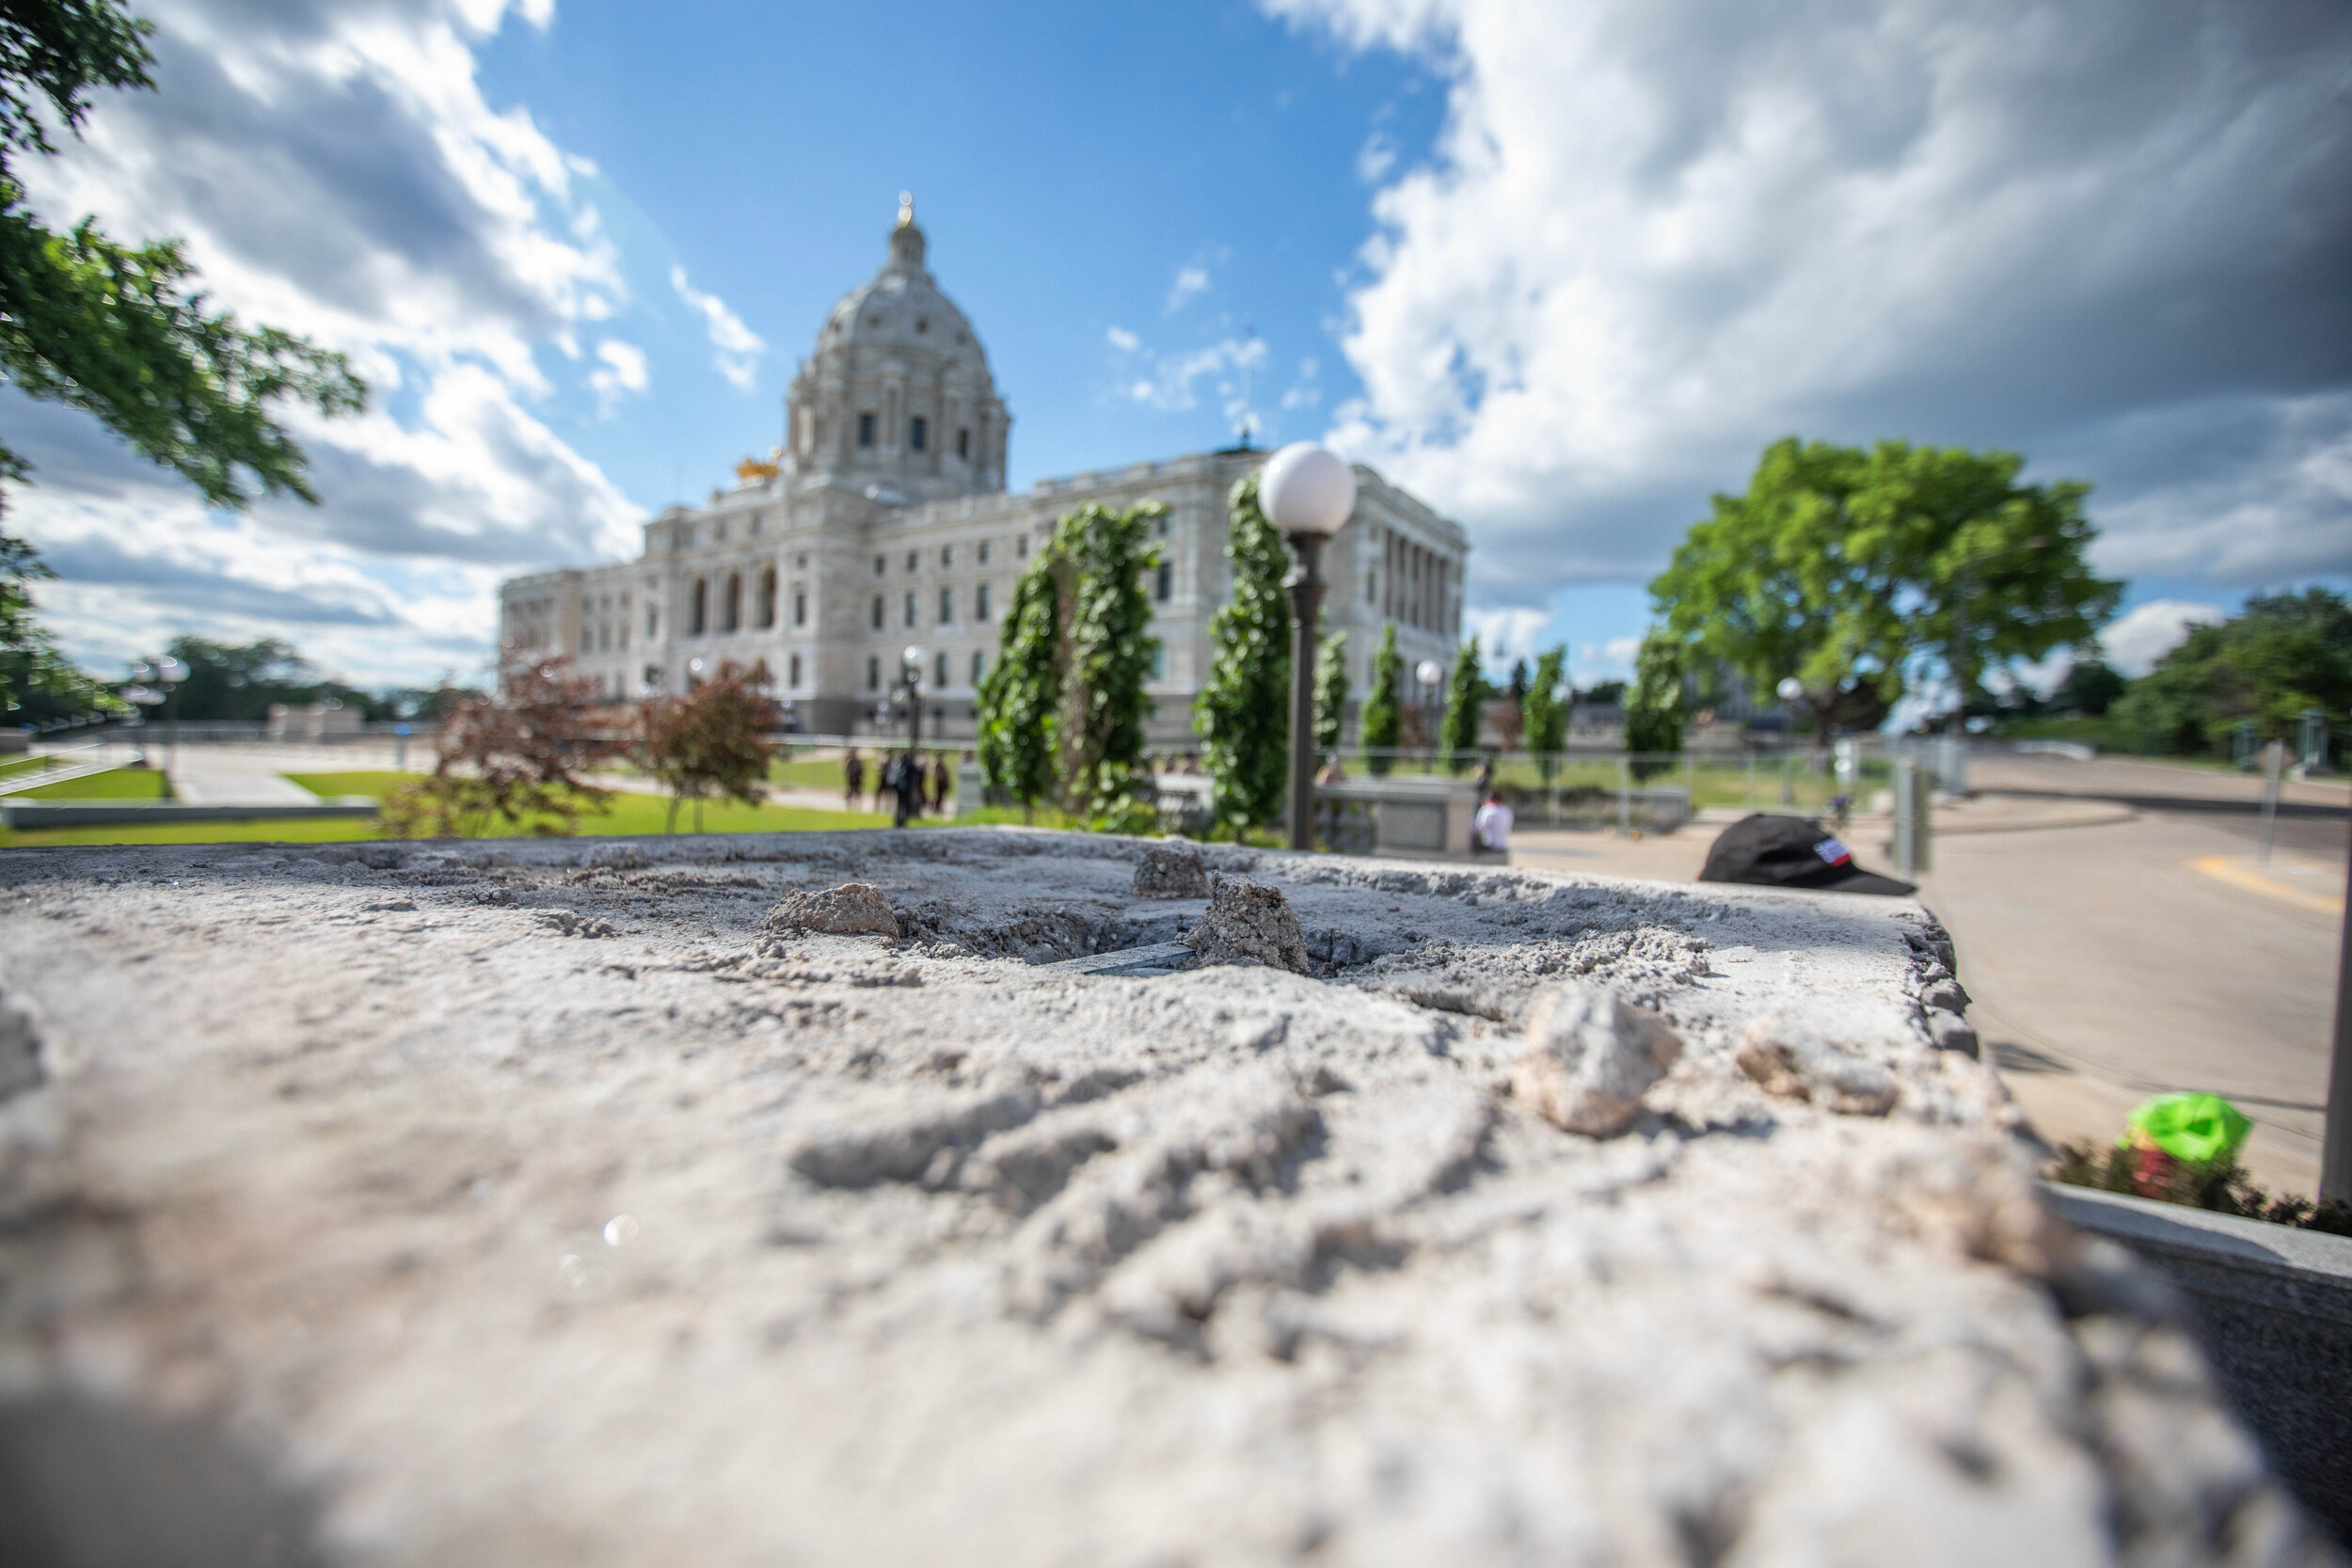  Broken apart, the pedestal where the Christopher Columbus statue once stood sits empty on the grounds of the State Capitol in Saint Paul, Minnesota on Jun 10, 2020. 